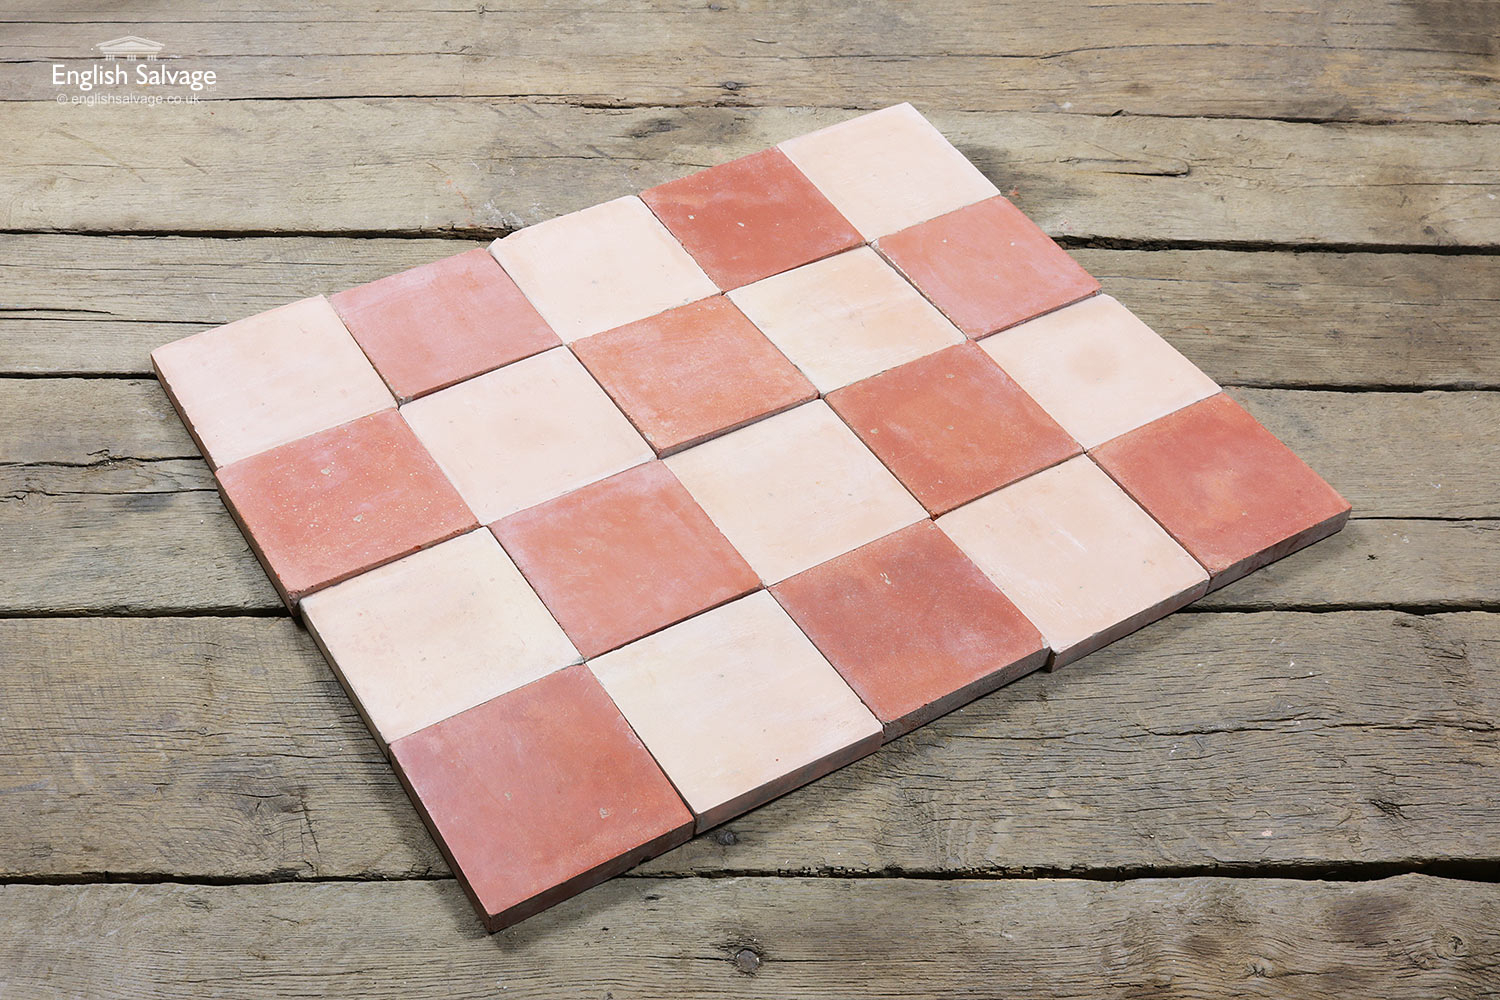 Traditional quarry tiles